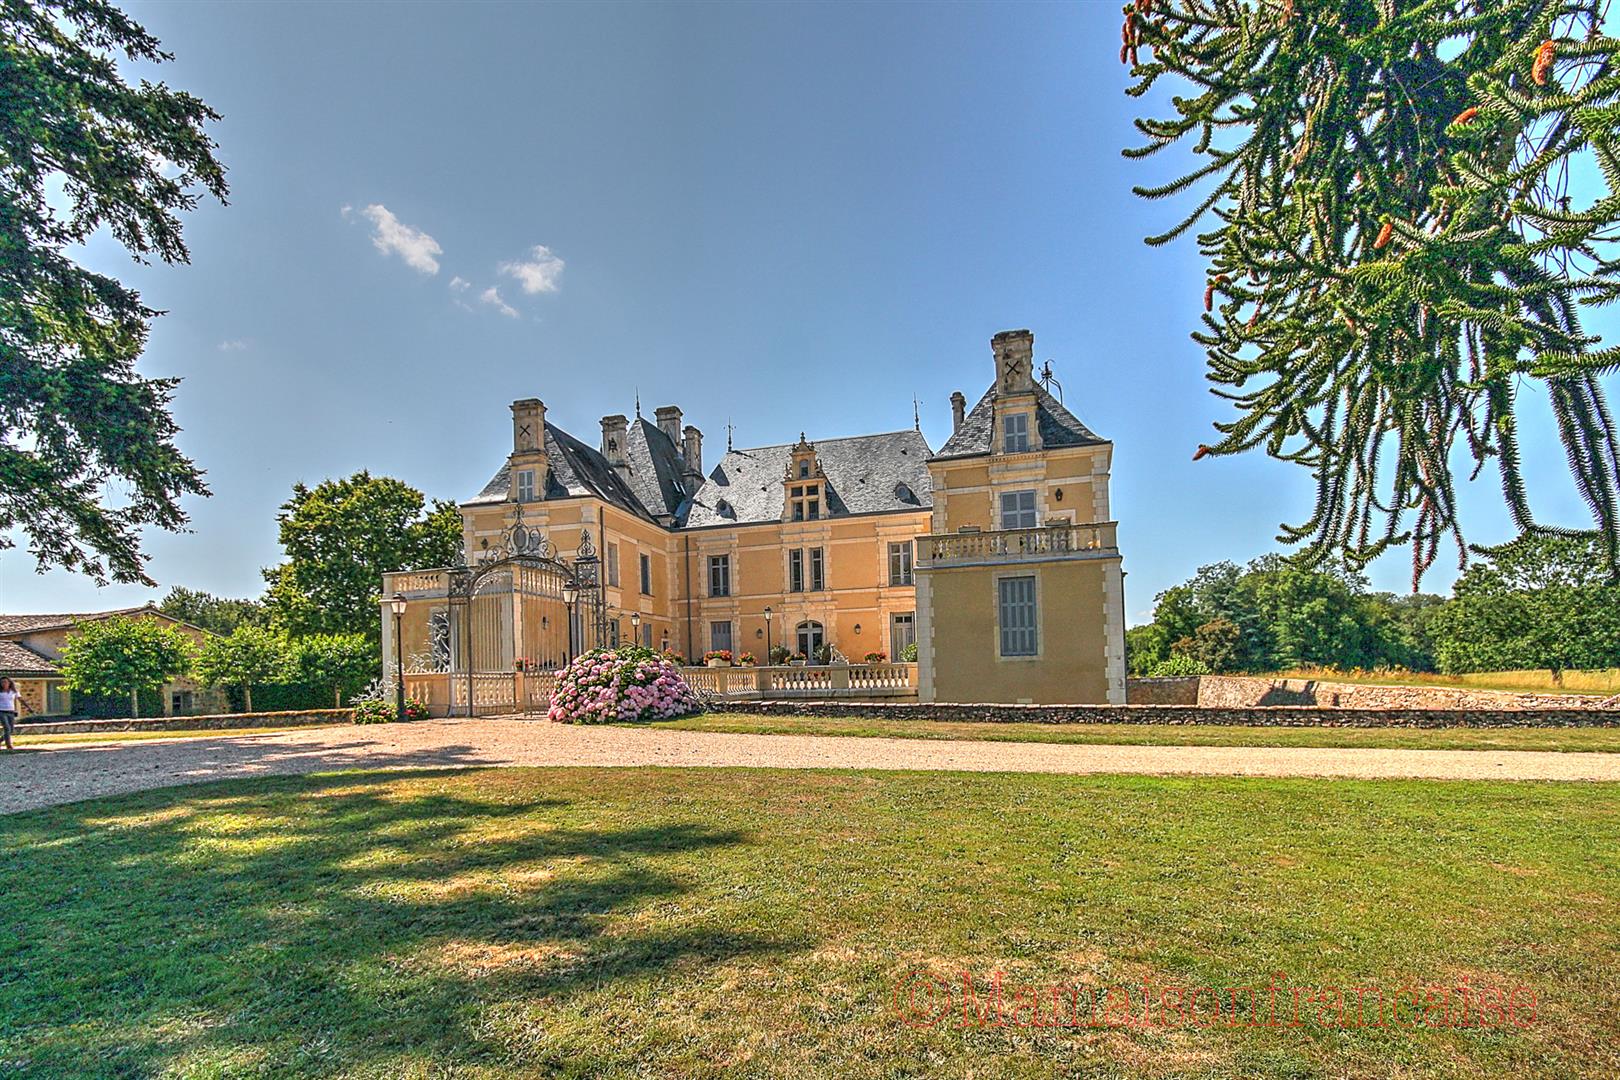 Apartment in the converted stables of a stunning chateau, pool & park